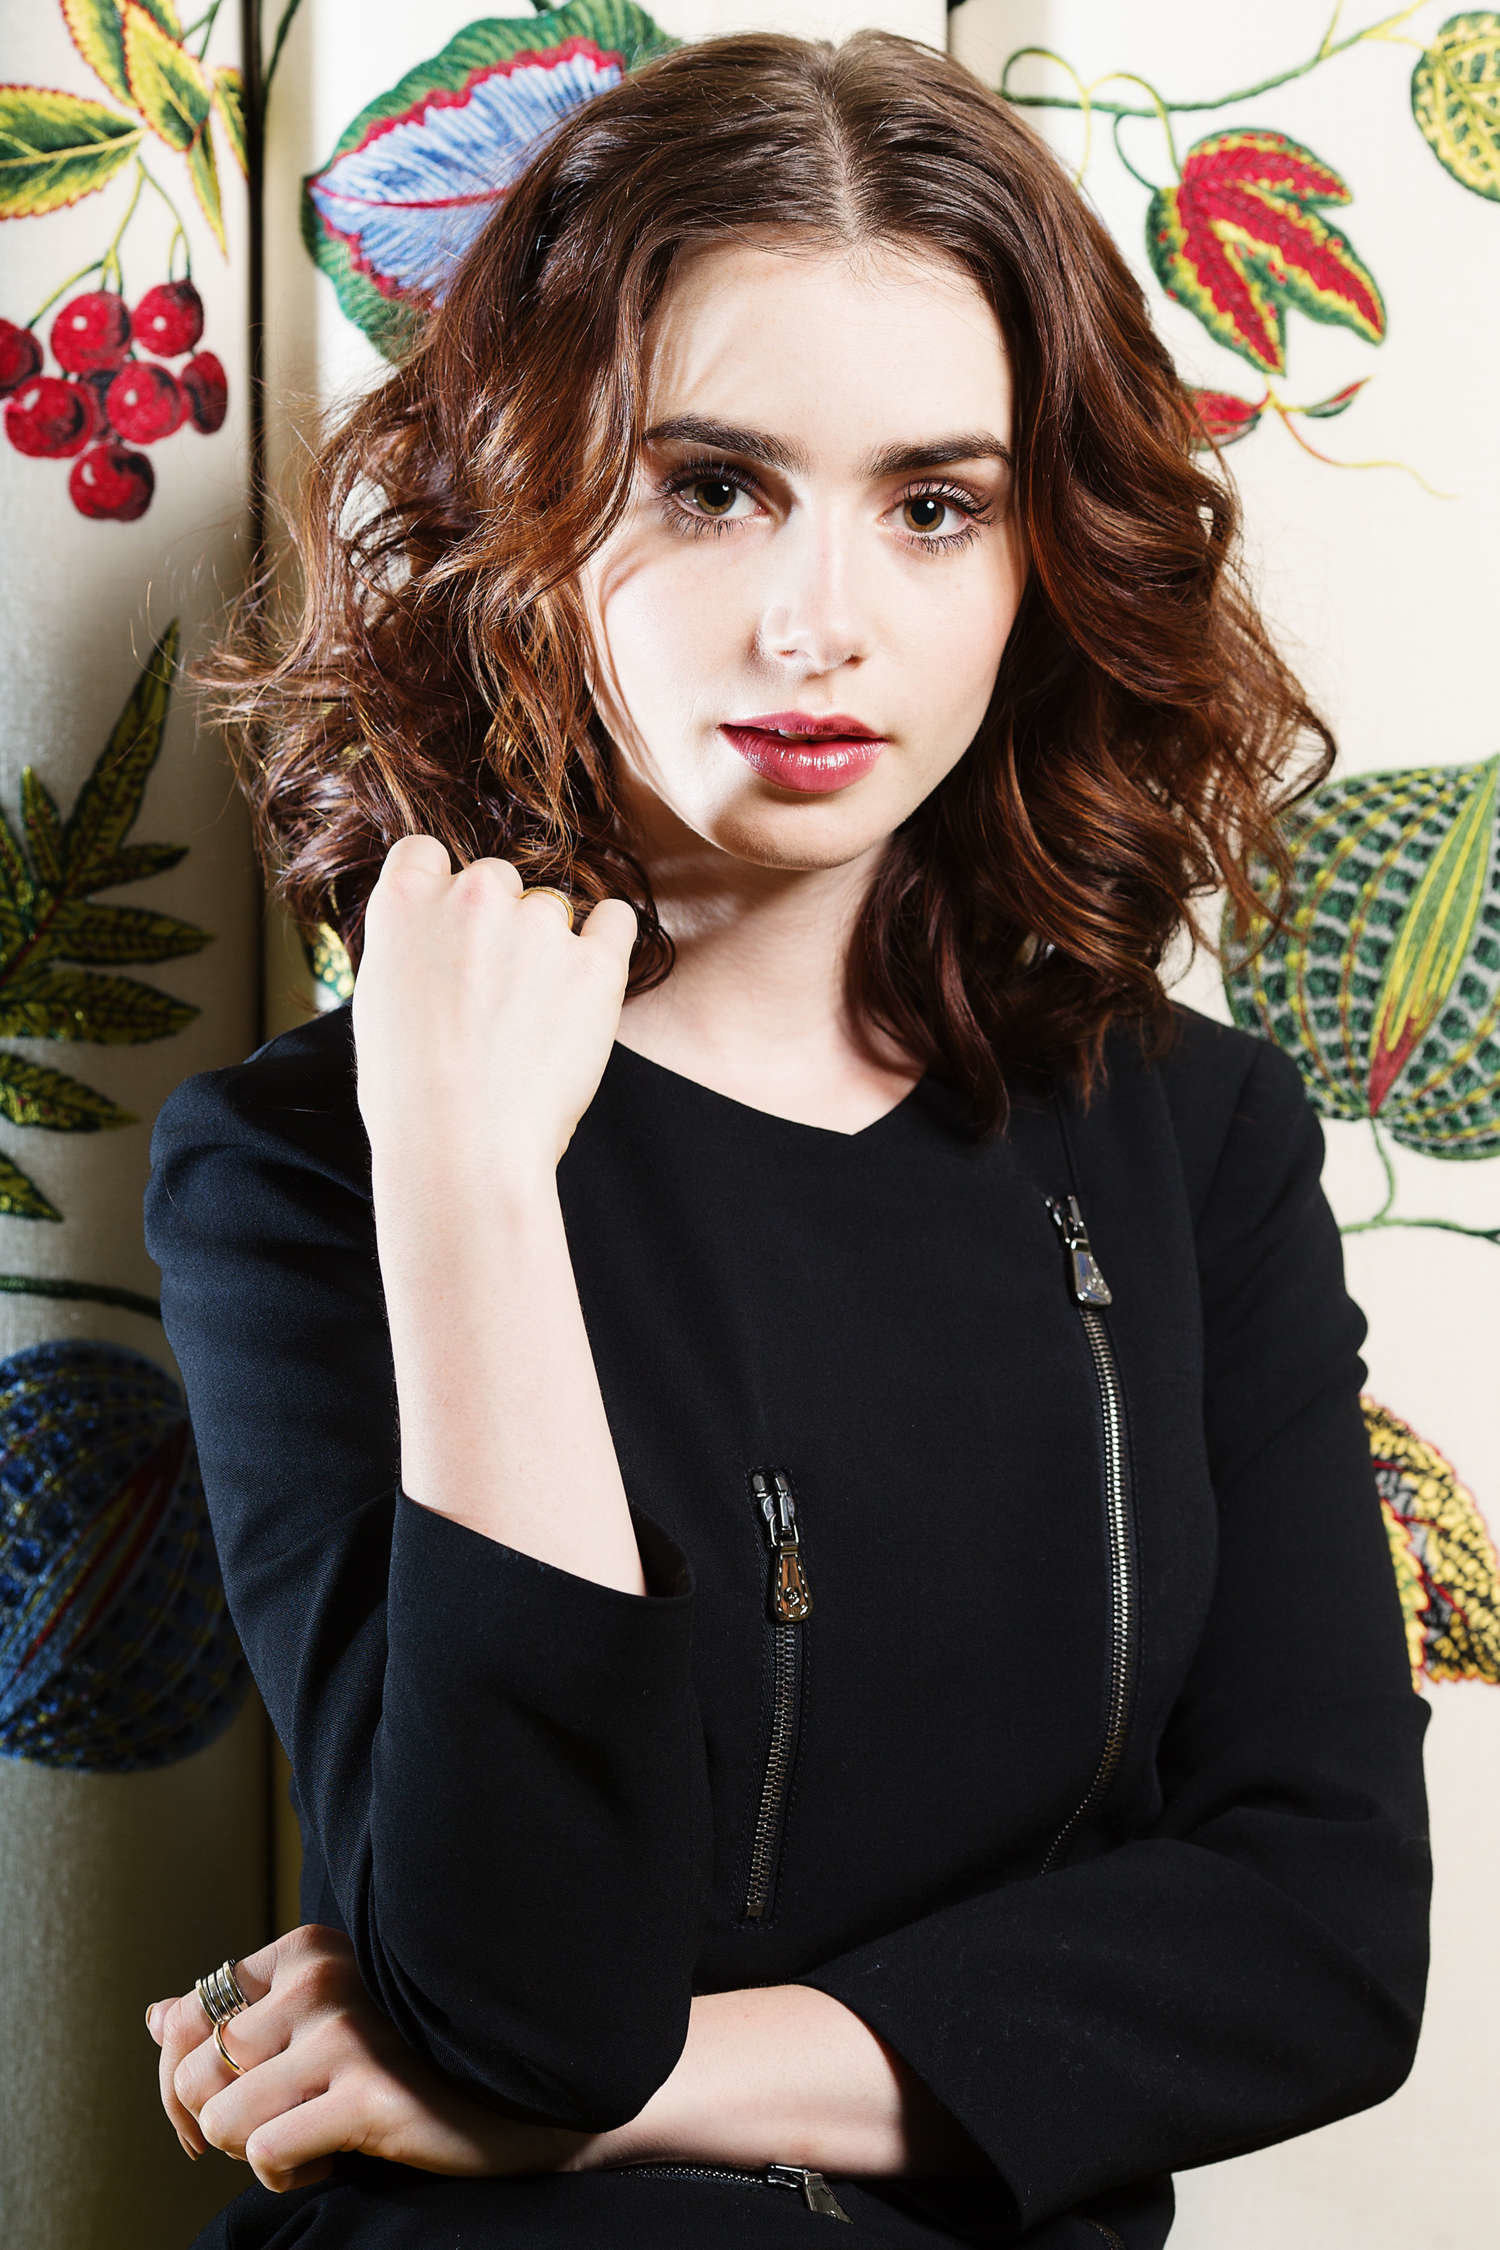 Lily Collins photo 259 of 2542 pics, wallpaper - photo #615941 - ThePlace2